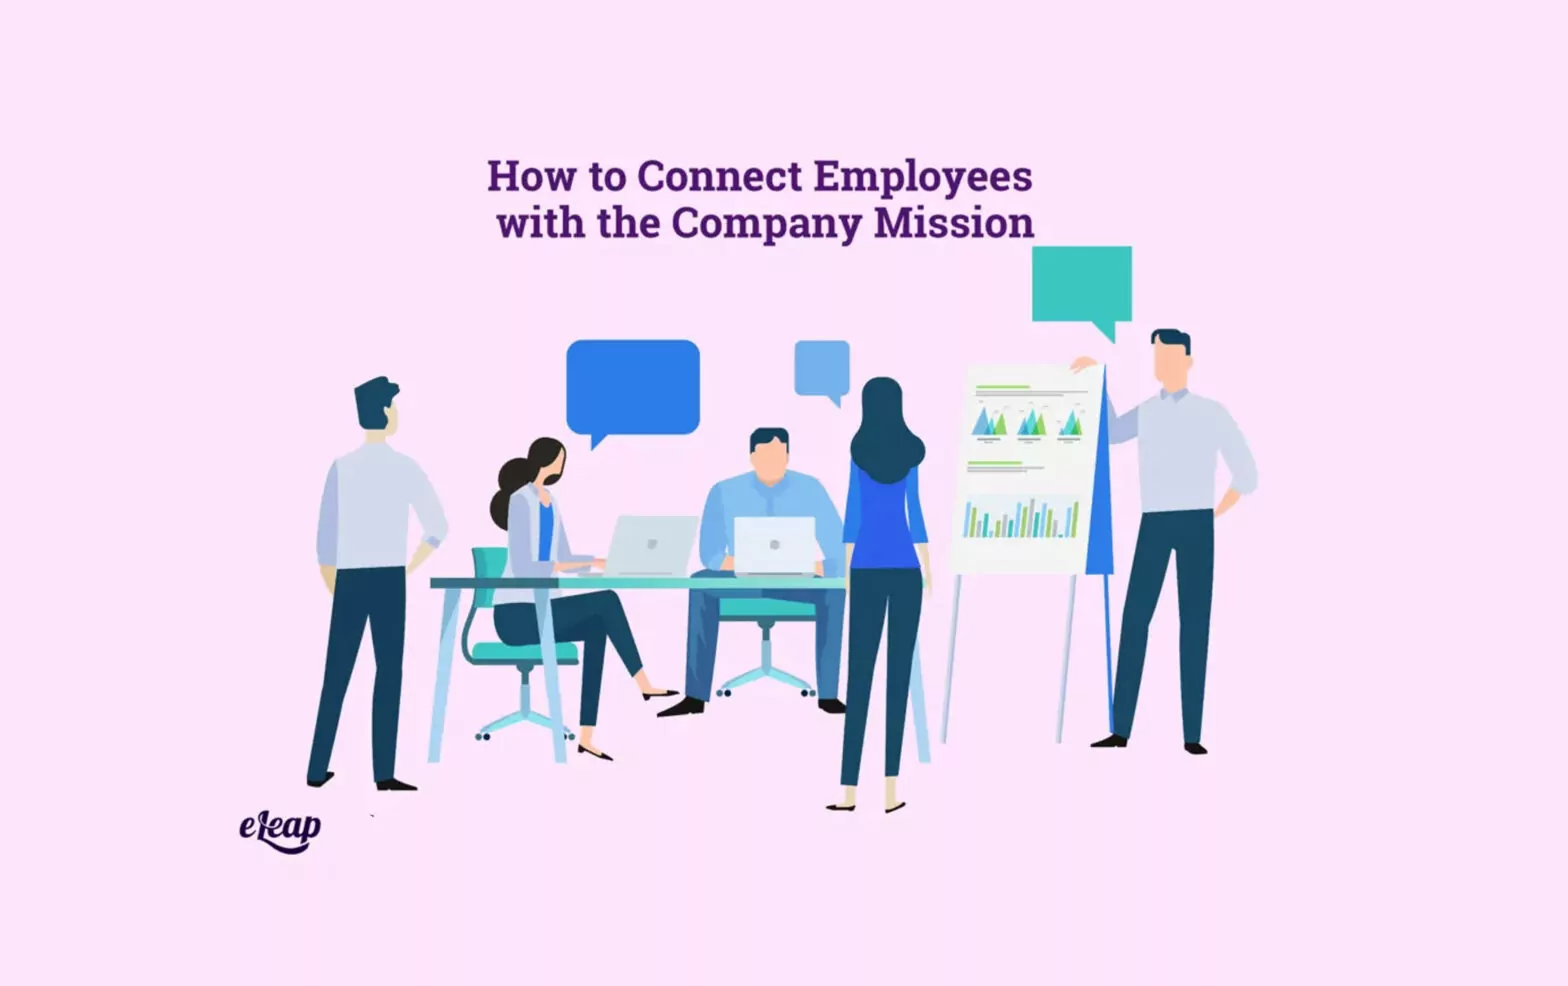 How to Connect Employees with the Company Mission